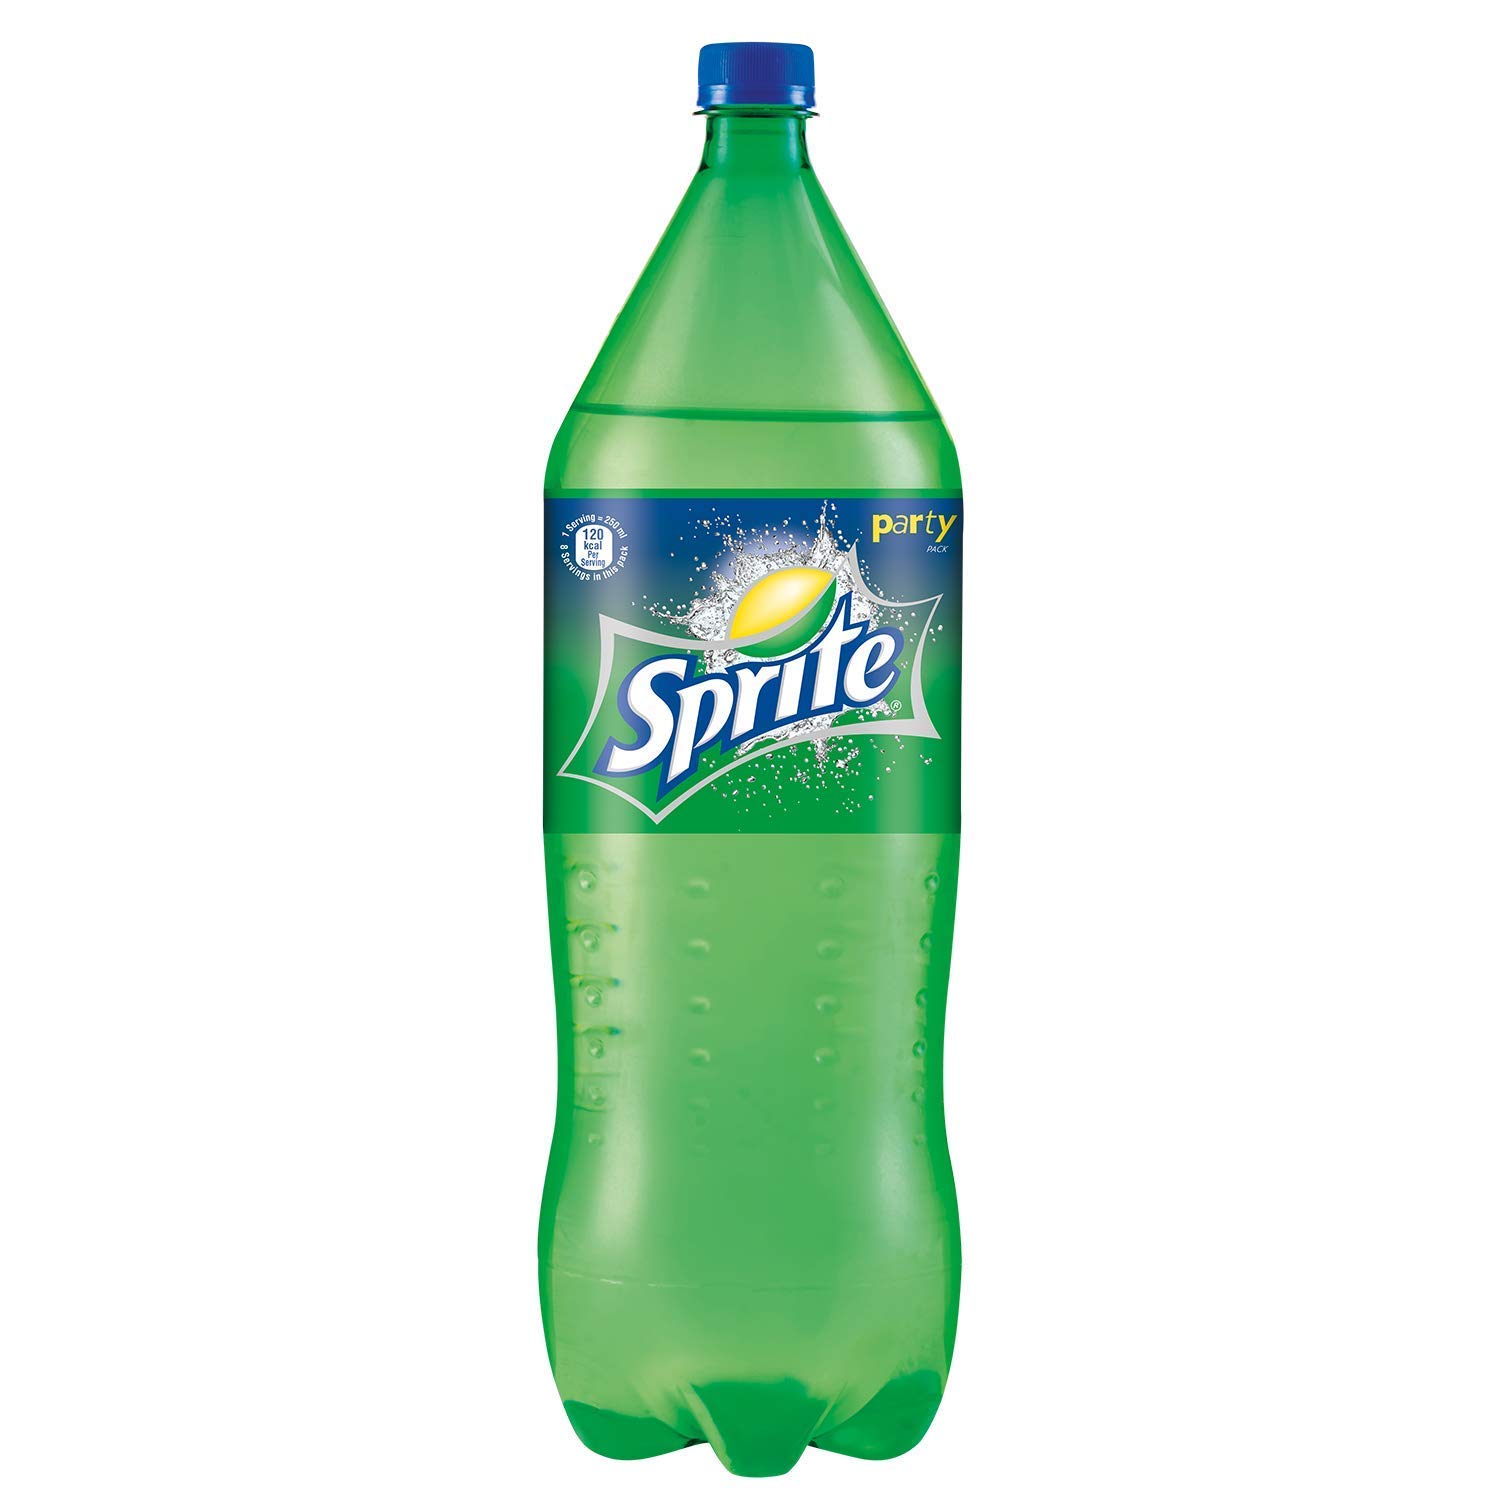 Detail Picture Of Sprite Bottle Nomer 29